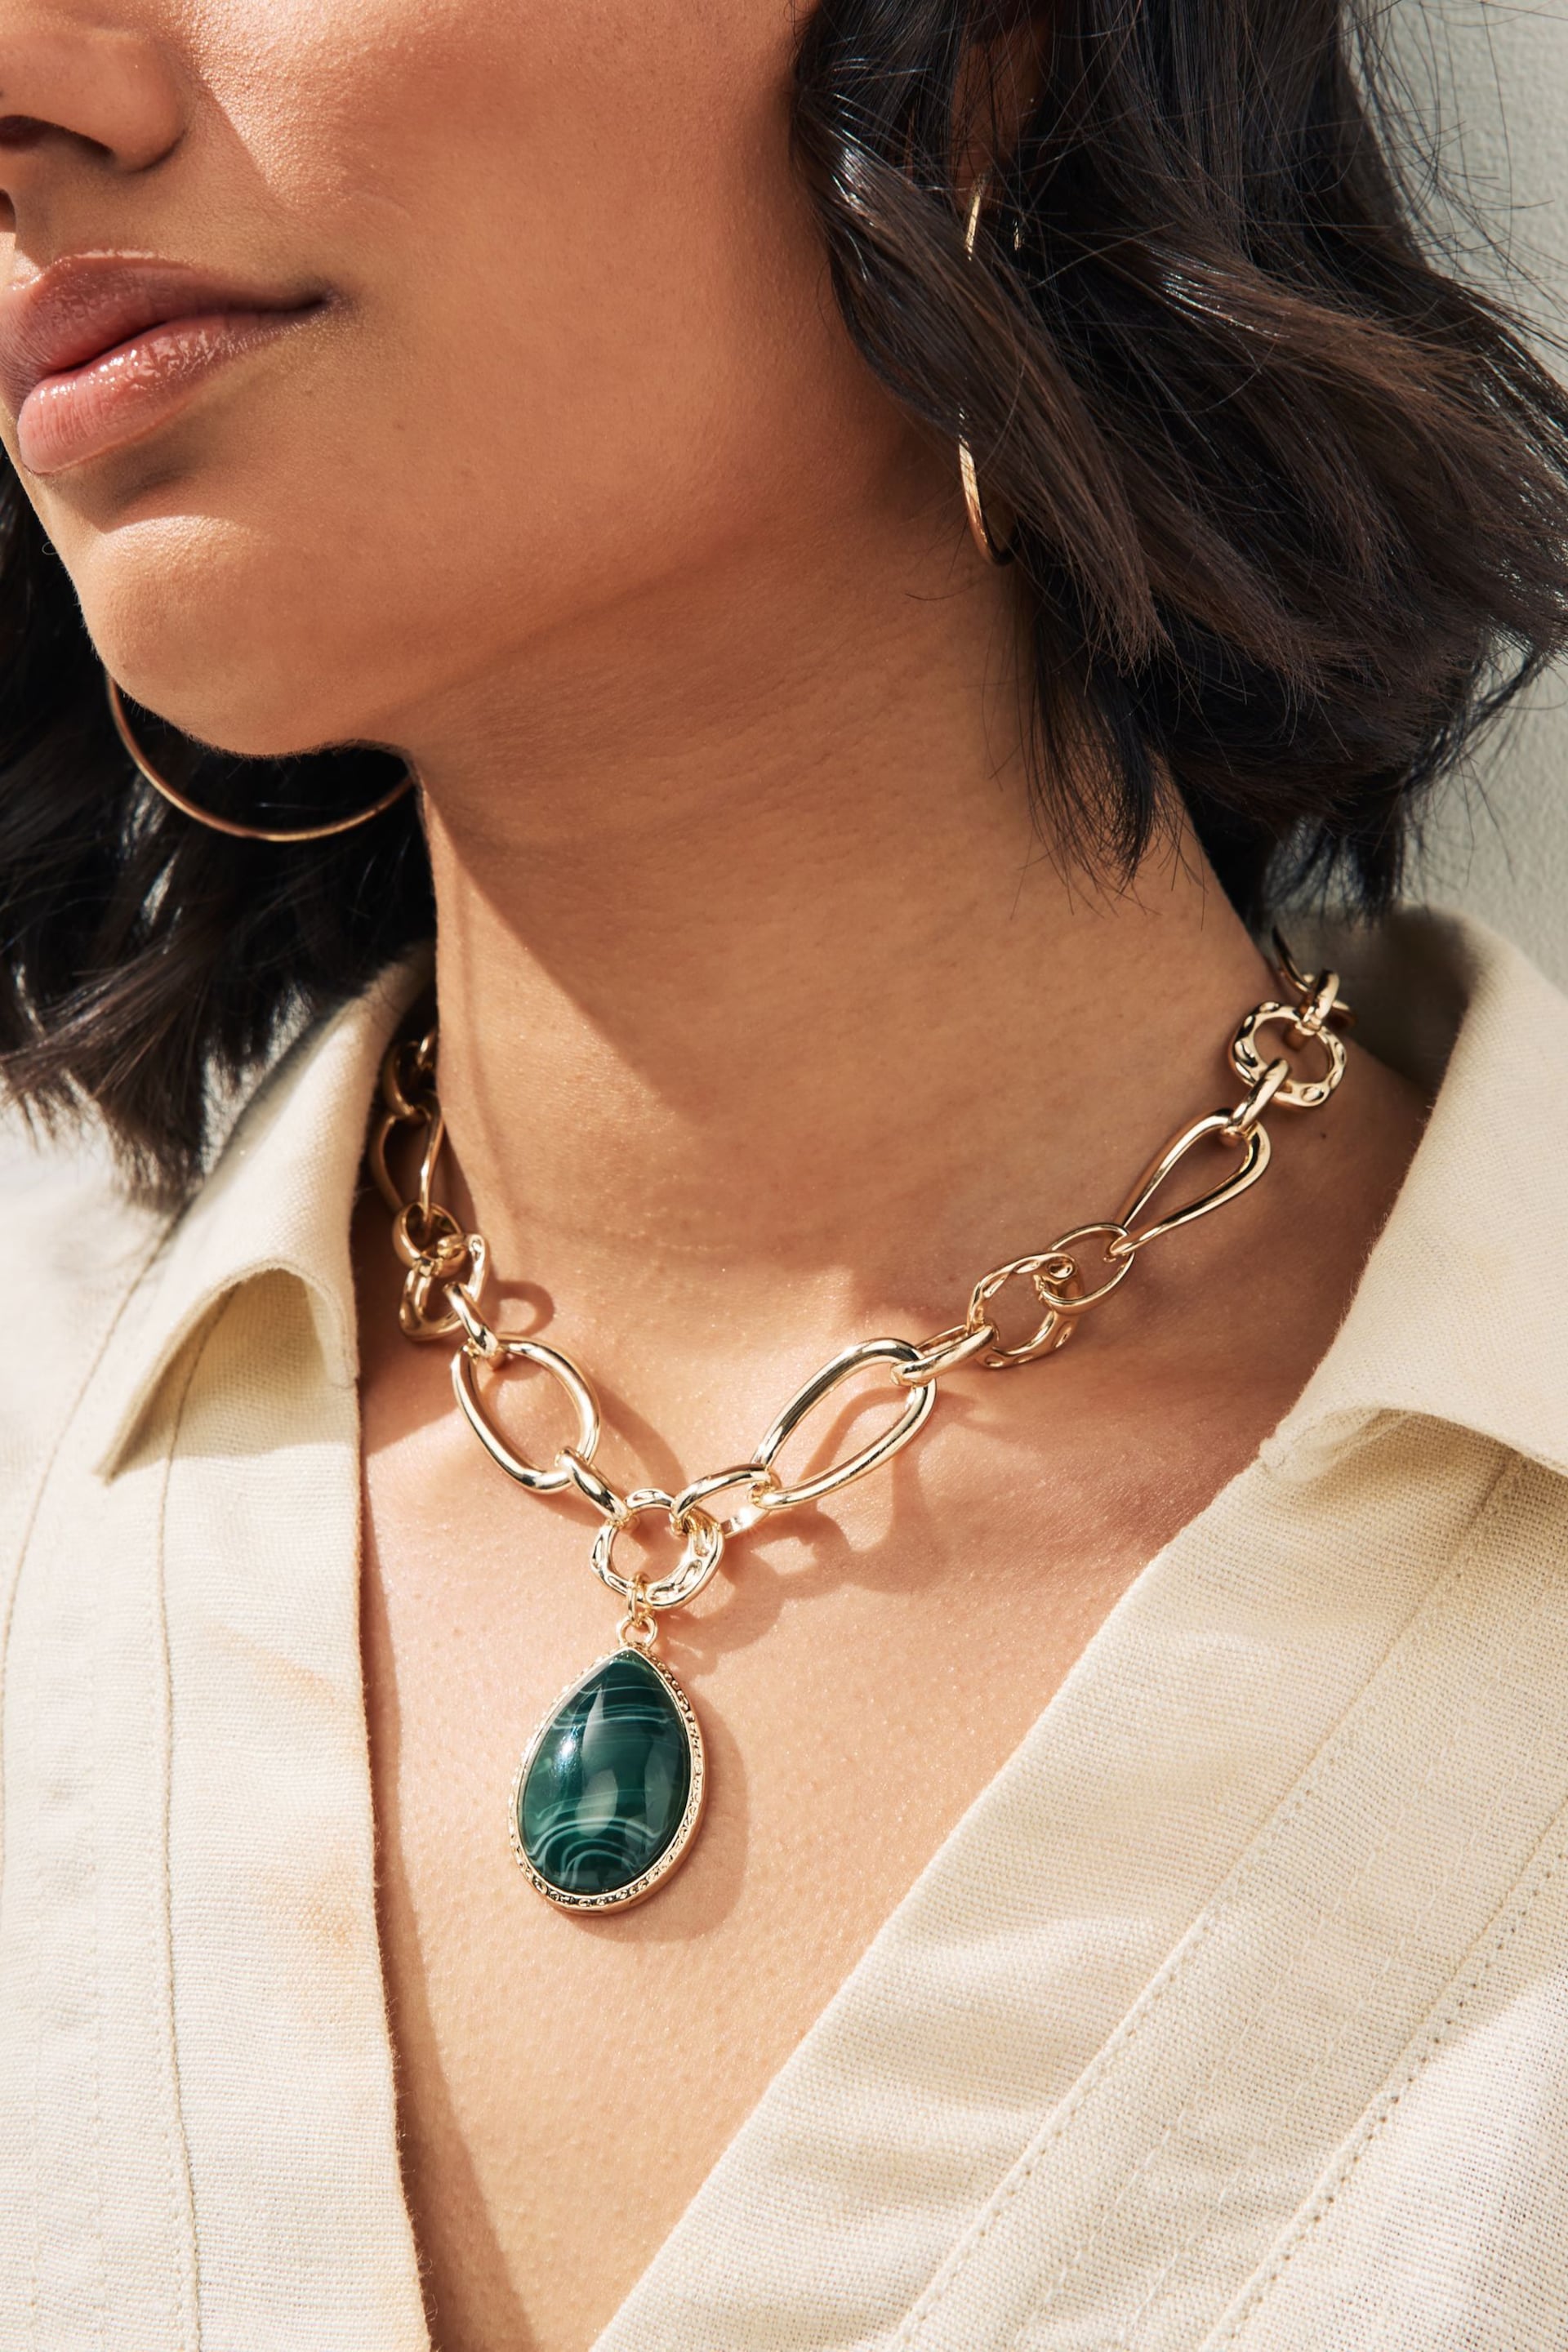 Gold Tone Chunky Chain Green Faux Stone Drop Necklace Made With Recycled Metals - Image 1 of 4